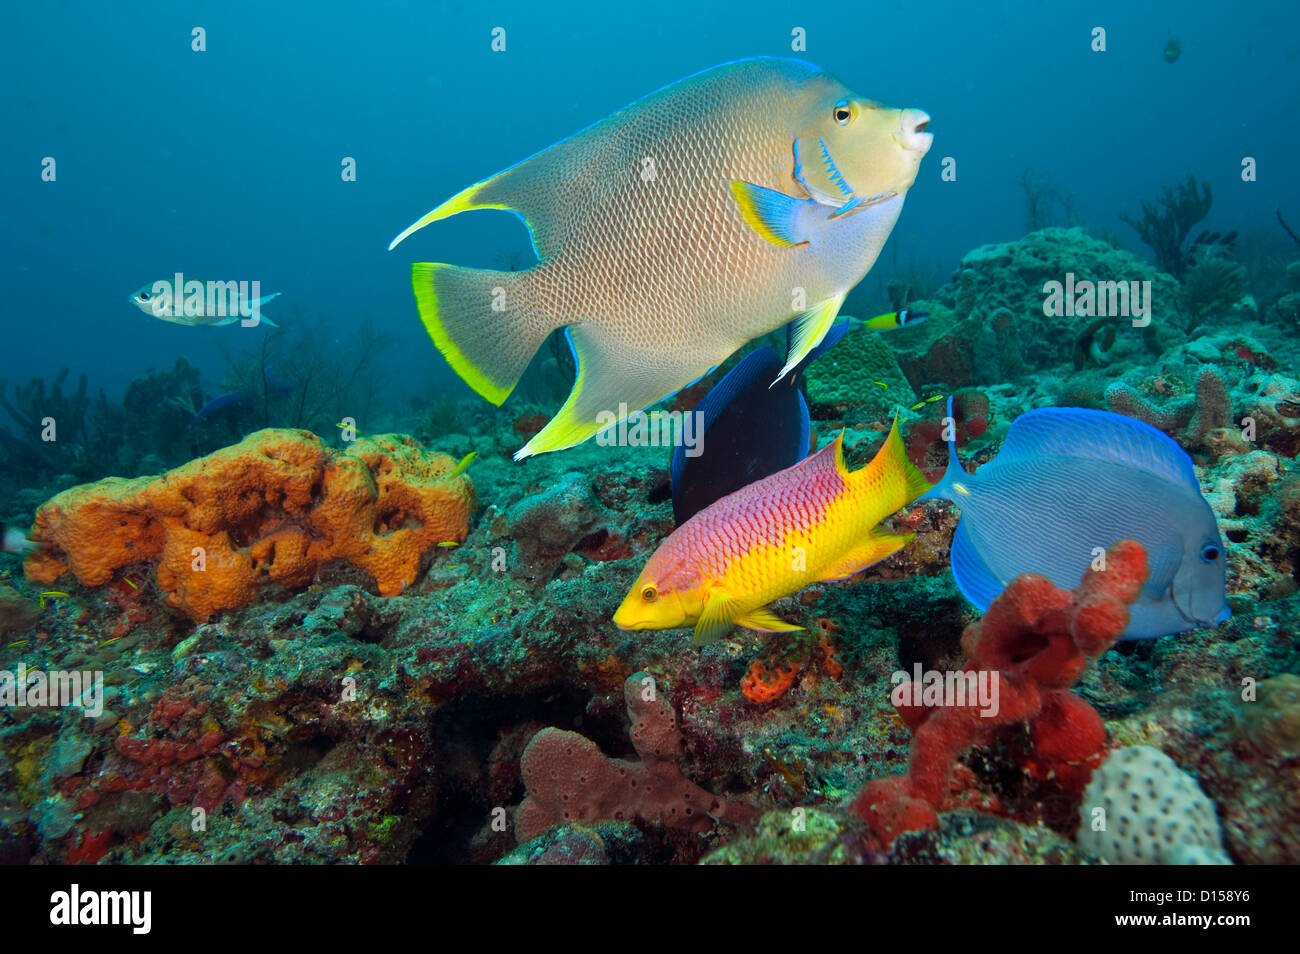 Blue angelfish, Holacanthus bermudensis, feed on sponges offshore Palm Beach, Florida, United States. Stock Photo